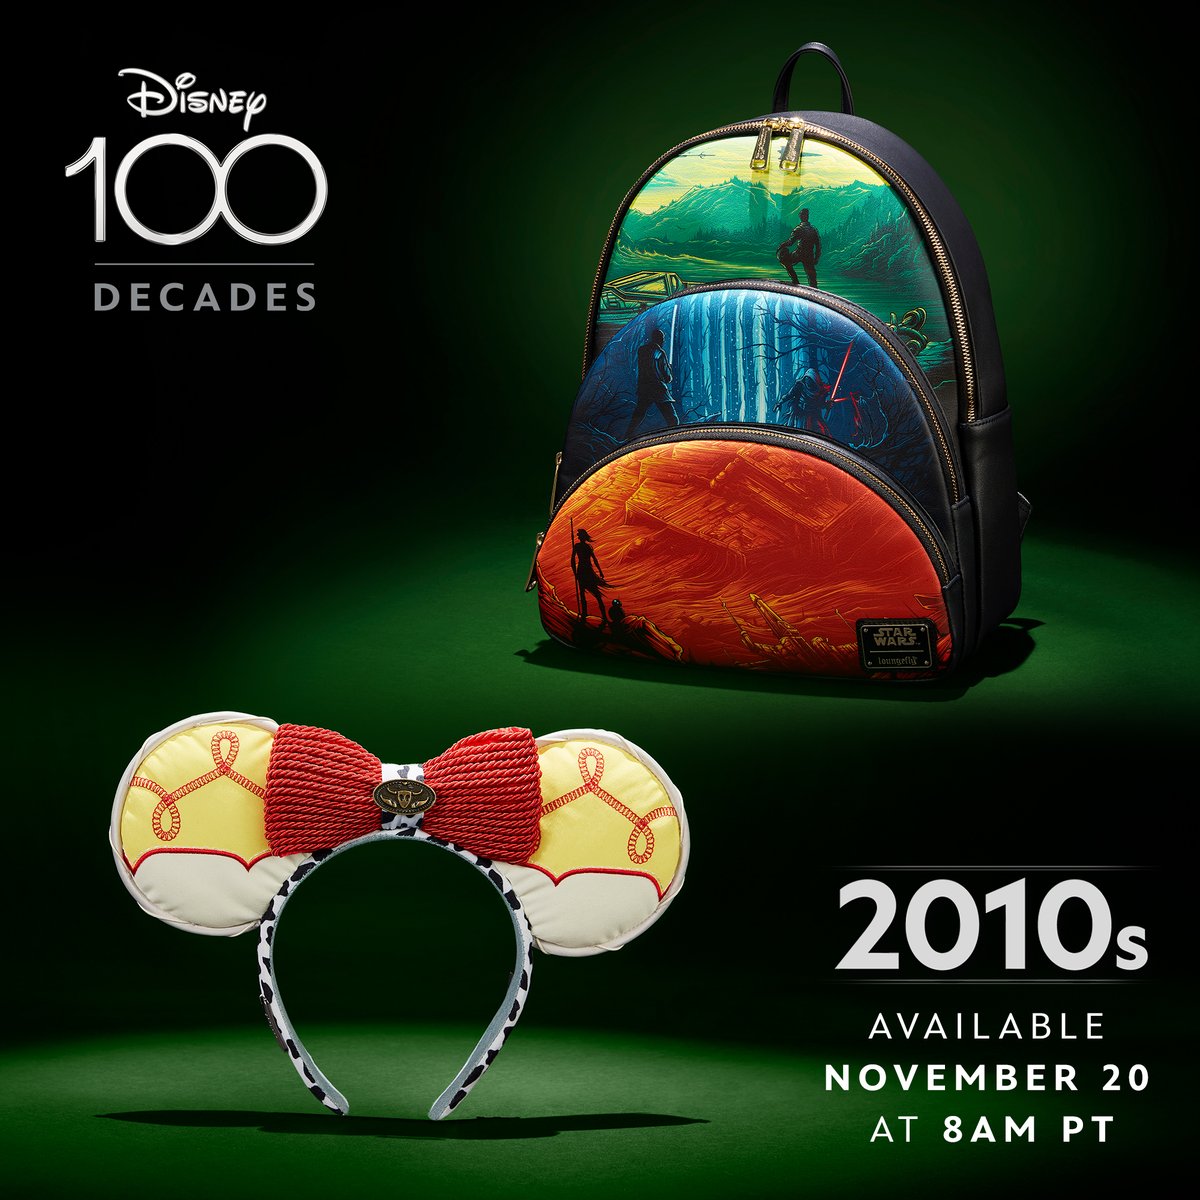 The final series in the Disney100 Decades Collection is calling to you! Let it in and celebrate favorites from the 2010s. di.sn/6015uag8S